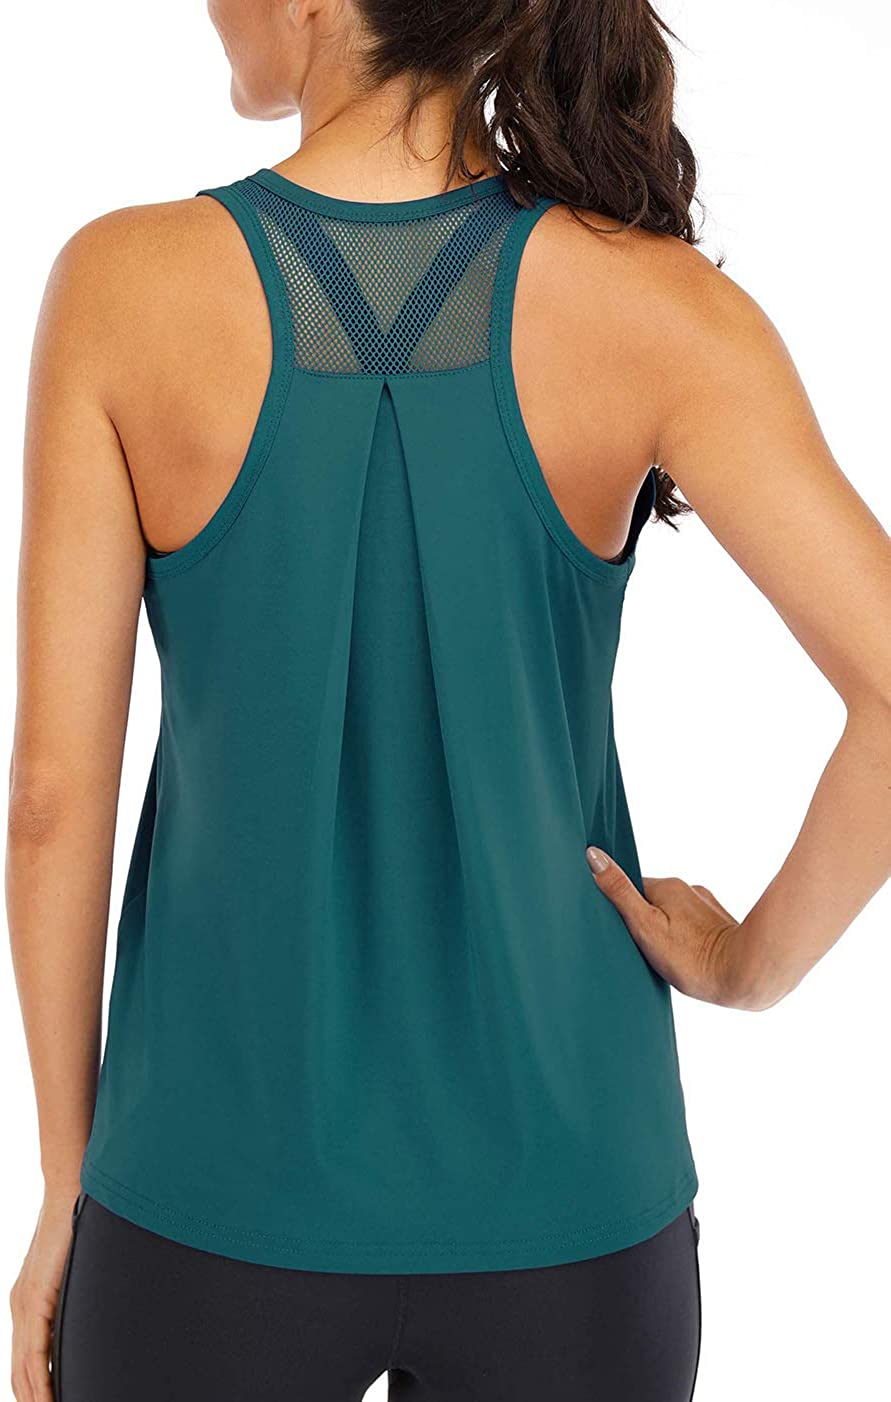  ICTIVE Workout Tops for Women Loose fit Racerback Tank